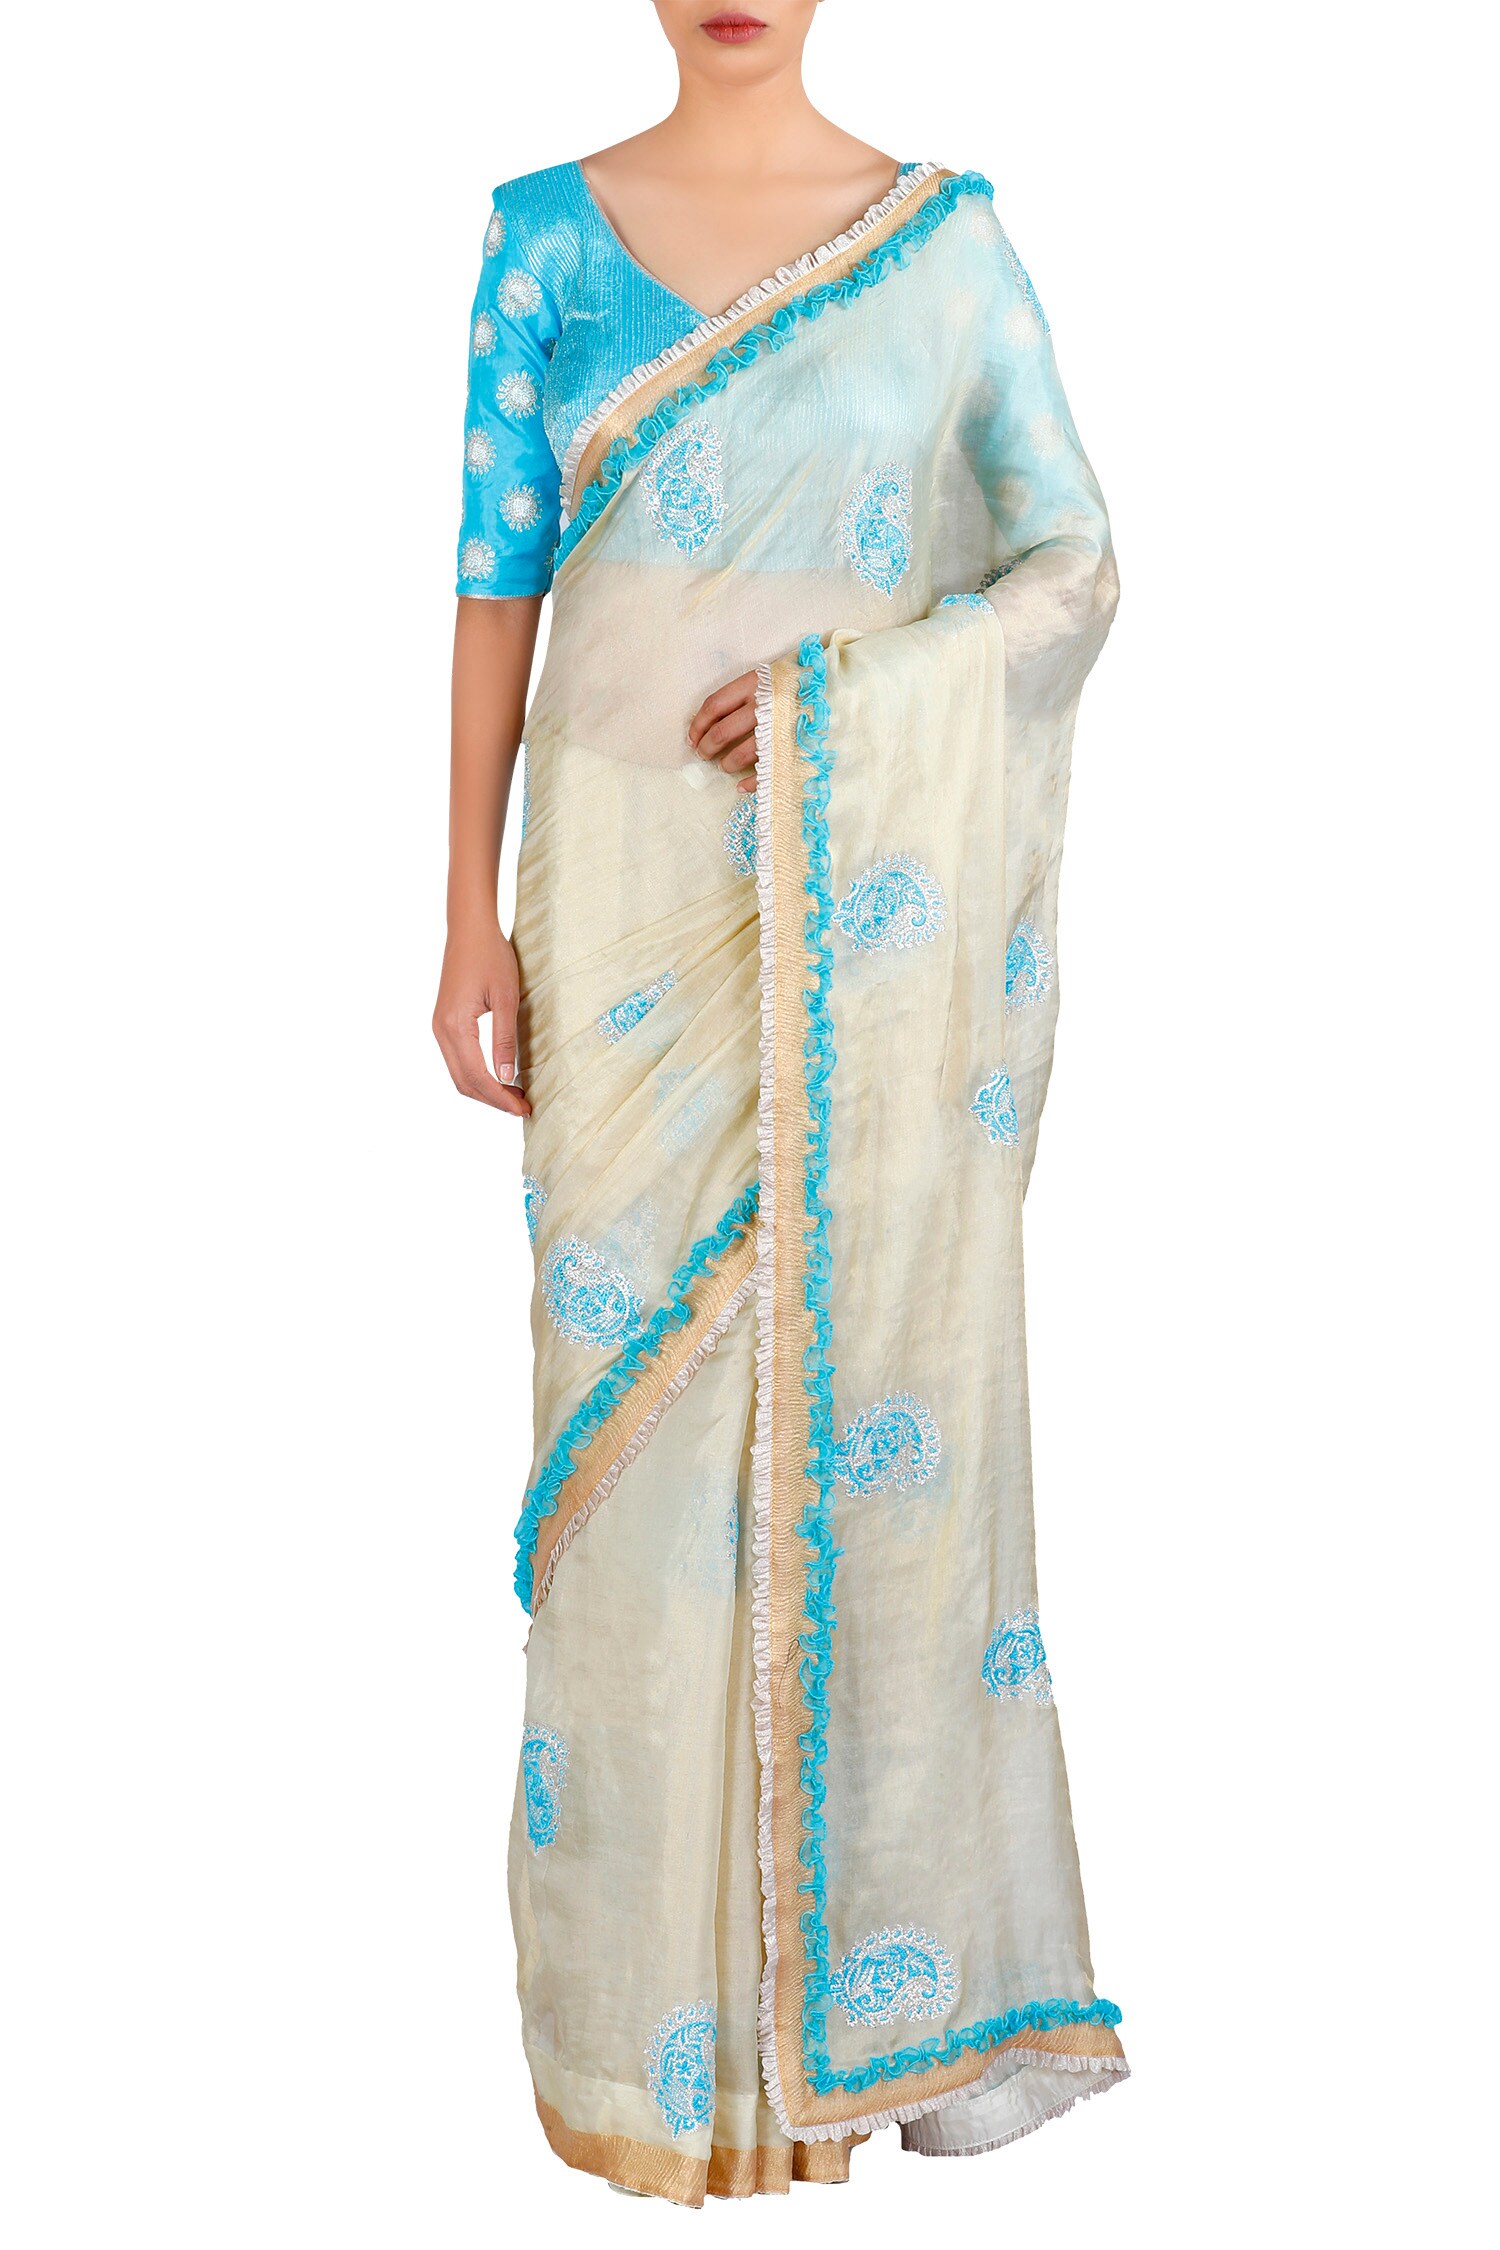 Latha Puttanna Blue Thread Work Paisley Embroidered And Frilled Border Saree With Blouse